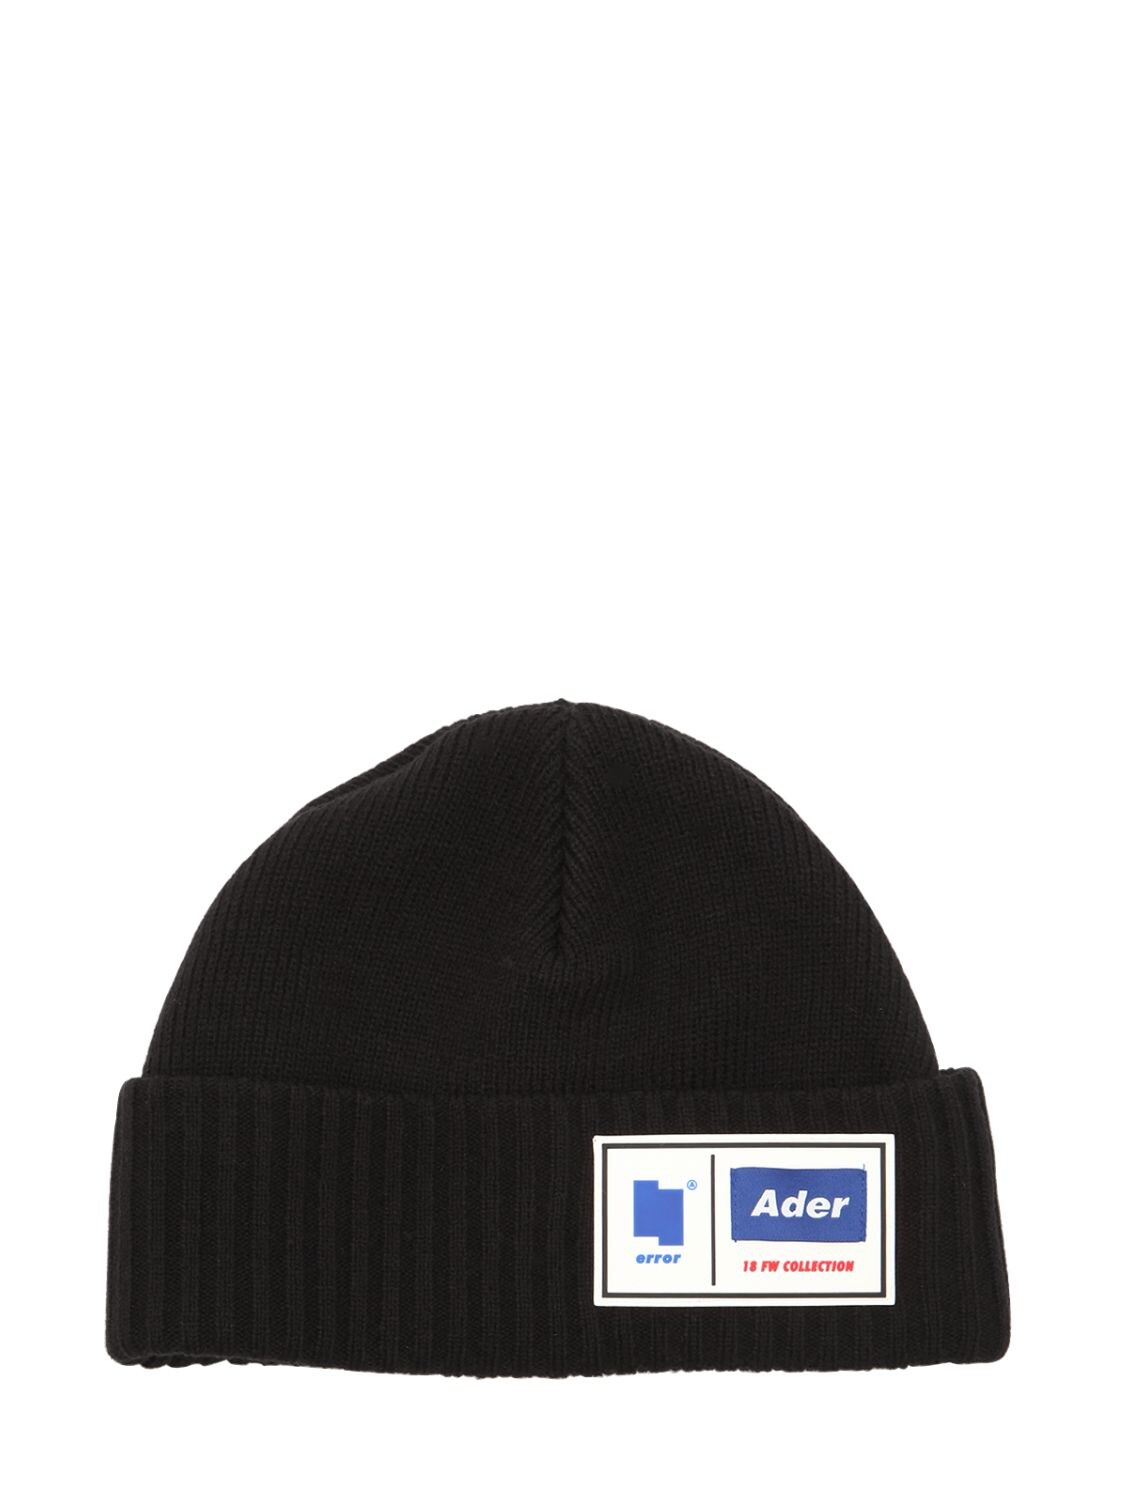 ADER ERROR RUBBERIZED PATCH WOOL BLEND BEANIE HAT,68IS3R011-QkxBSw2